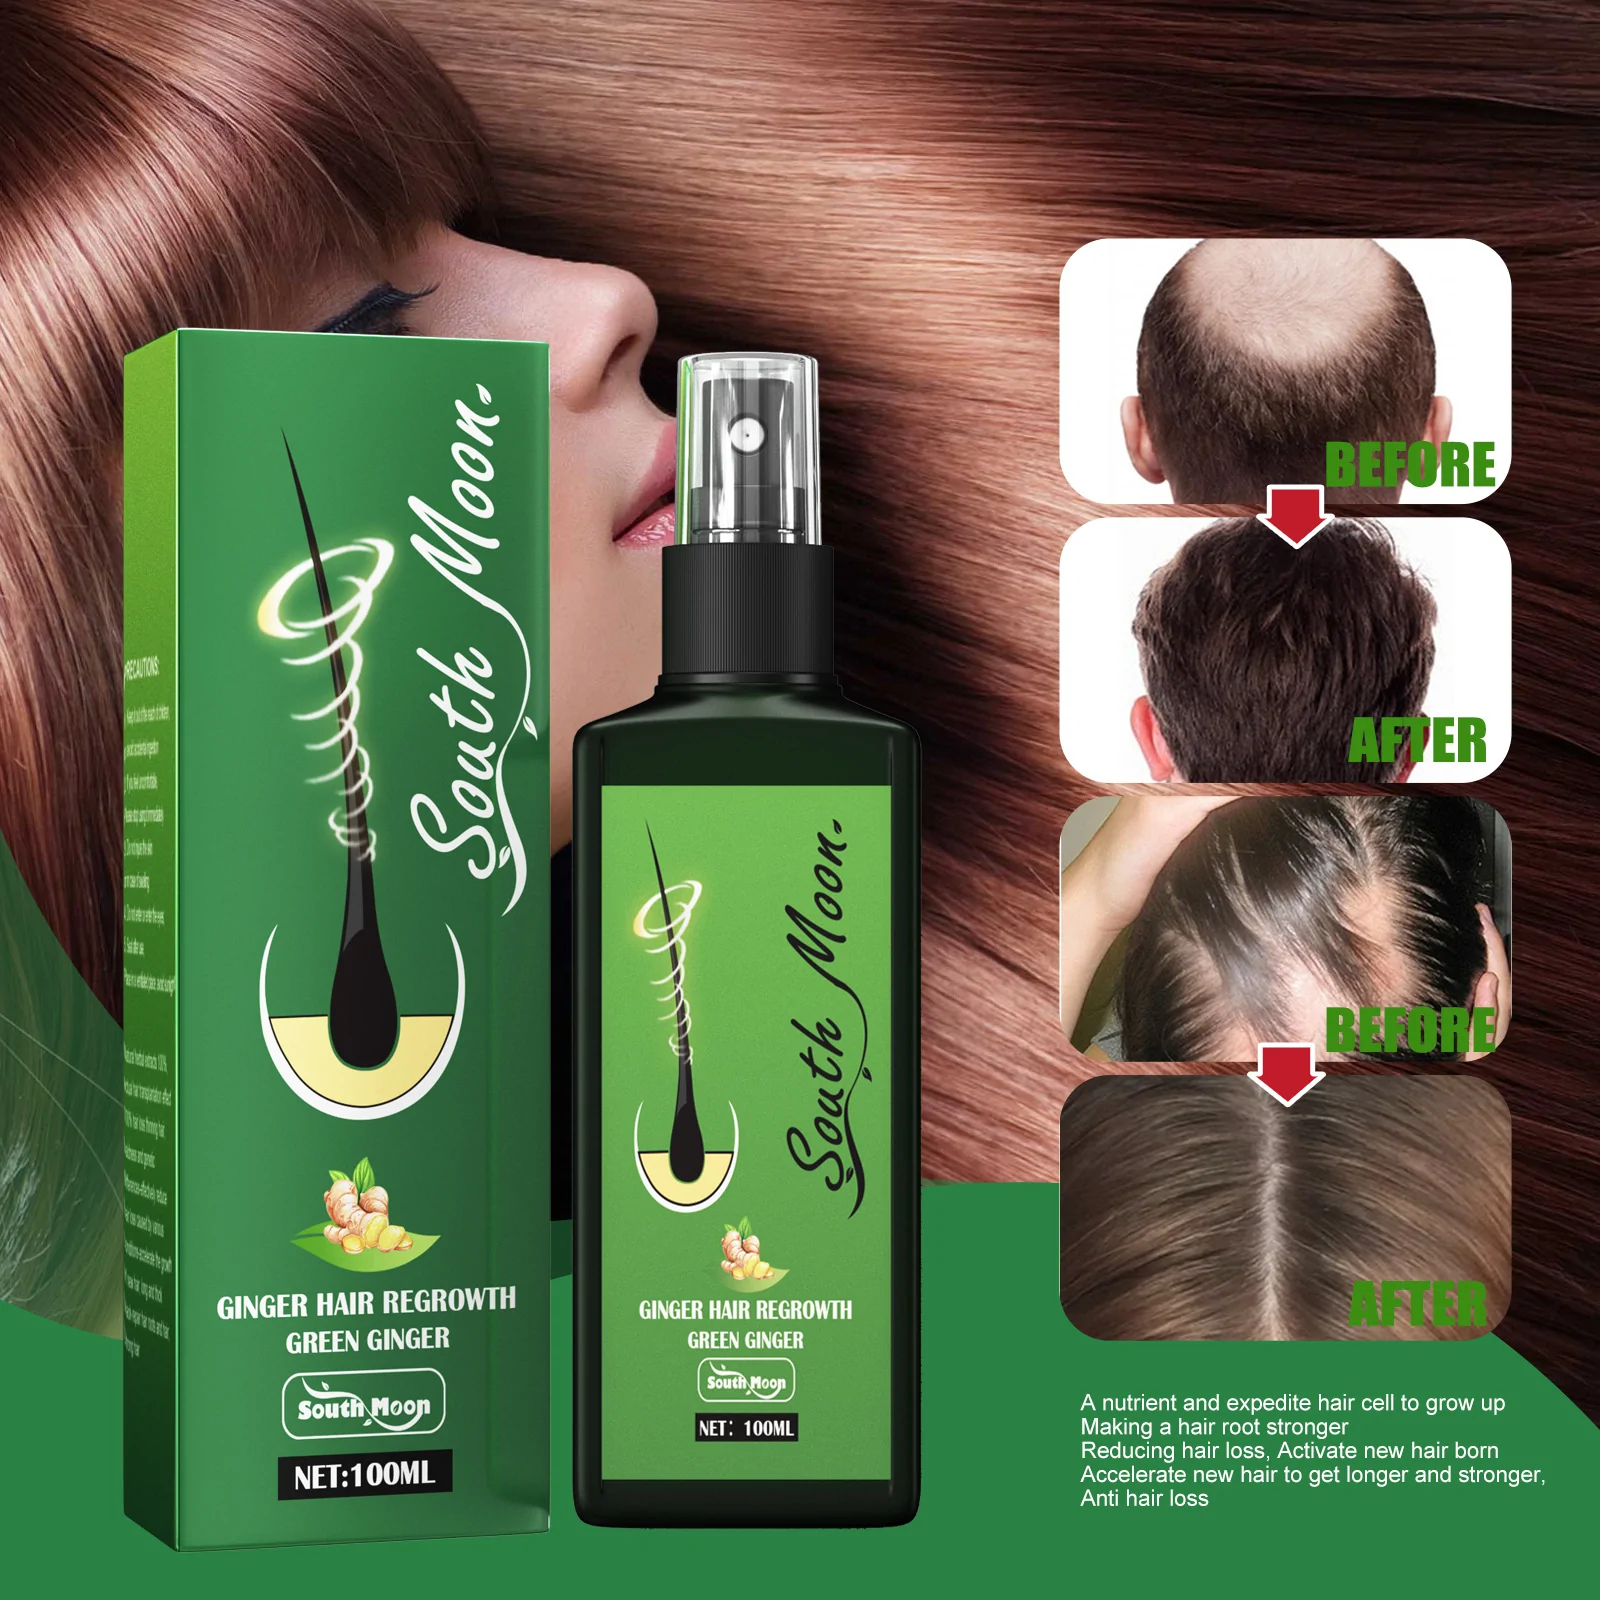 GrowthPlus Jaysuing Hair Spray - ultimate solution” for hair loss - Wowelo  - Your Smart Online Shop